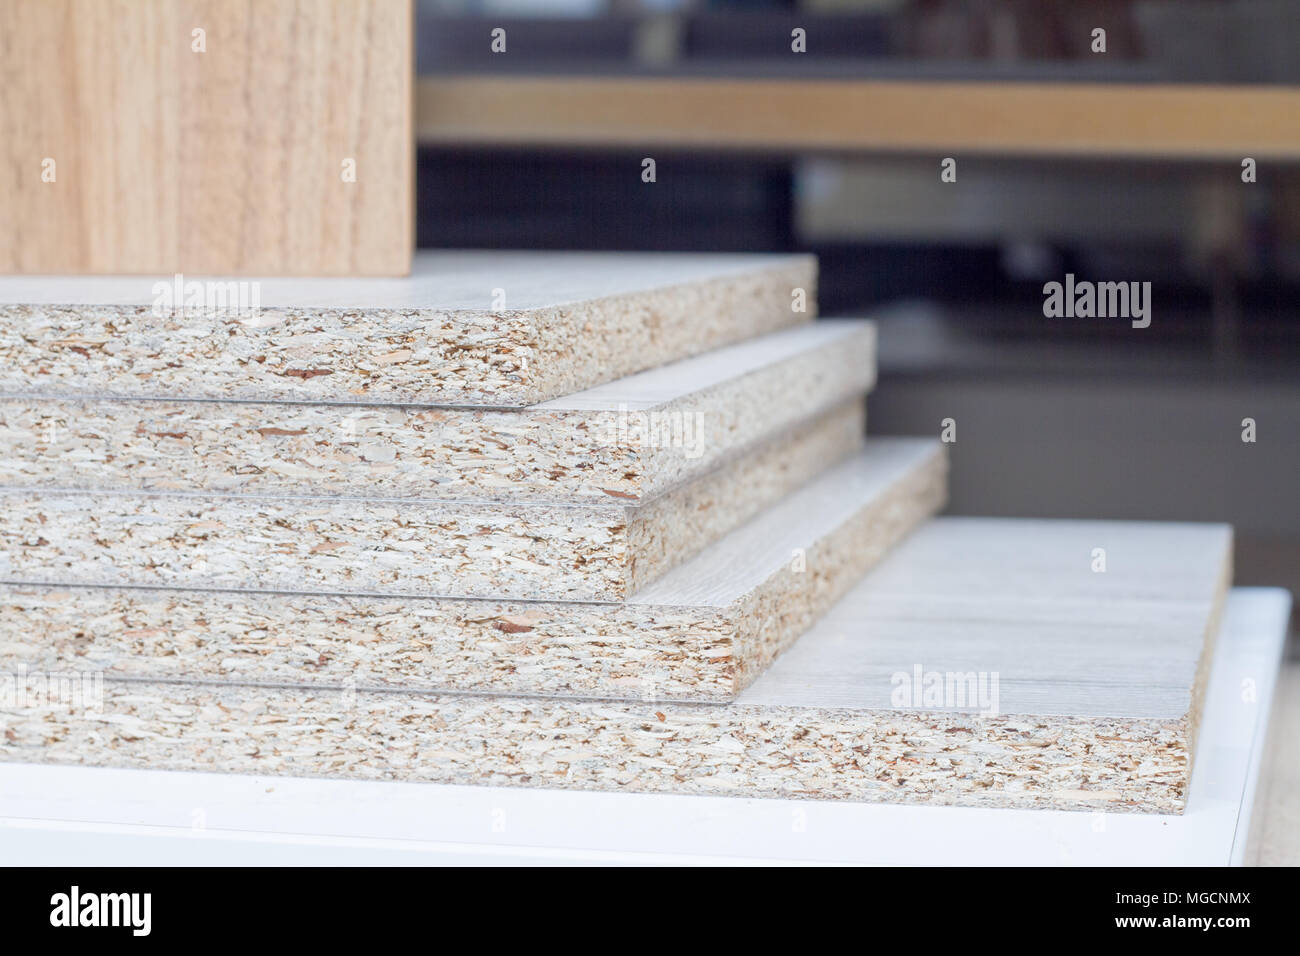 https://c8.alamy.com/comp/MGCNMX/mdf-particle-board-wood-panels-of-different-thicknesses-and-colors-furniture-fittings-for-furniture-production-on-an-industrial-scale-and-also-for-MGCNMX.jpg